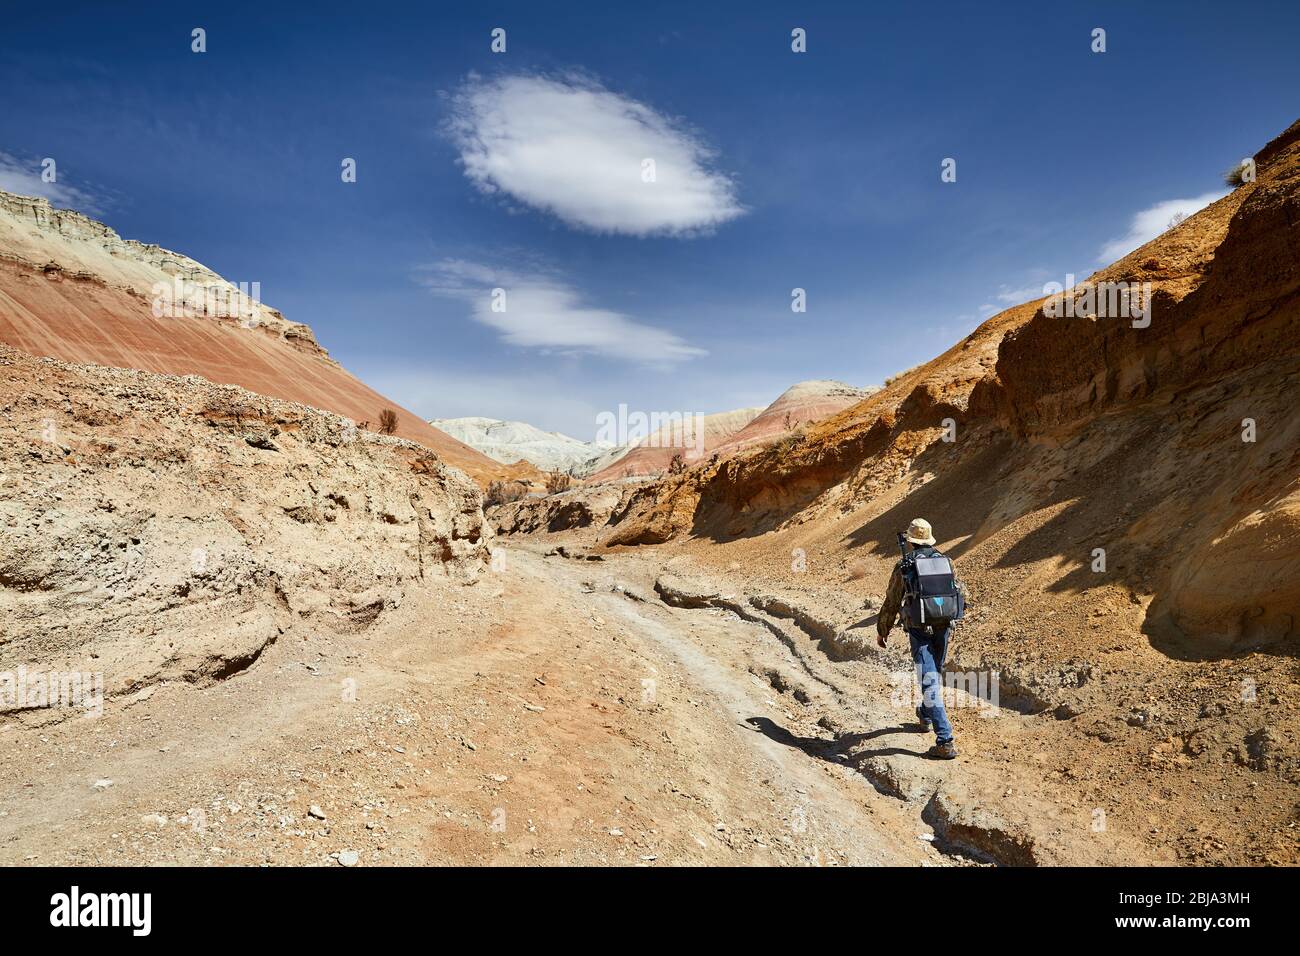 Tourist with backpack and camera walking in dusty canyon on surreal red mountains against blue sky in the desert Stock Photo